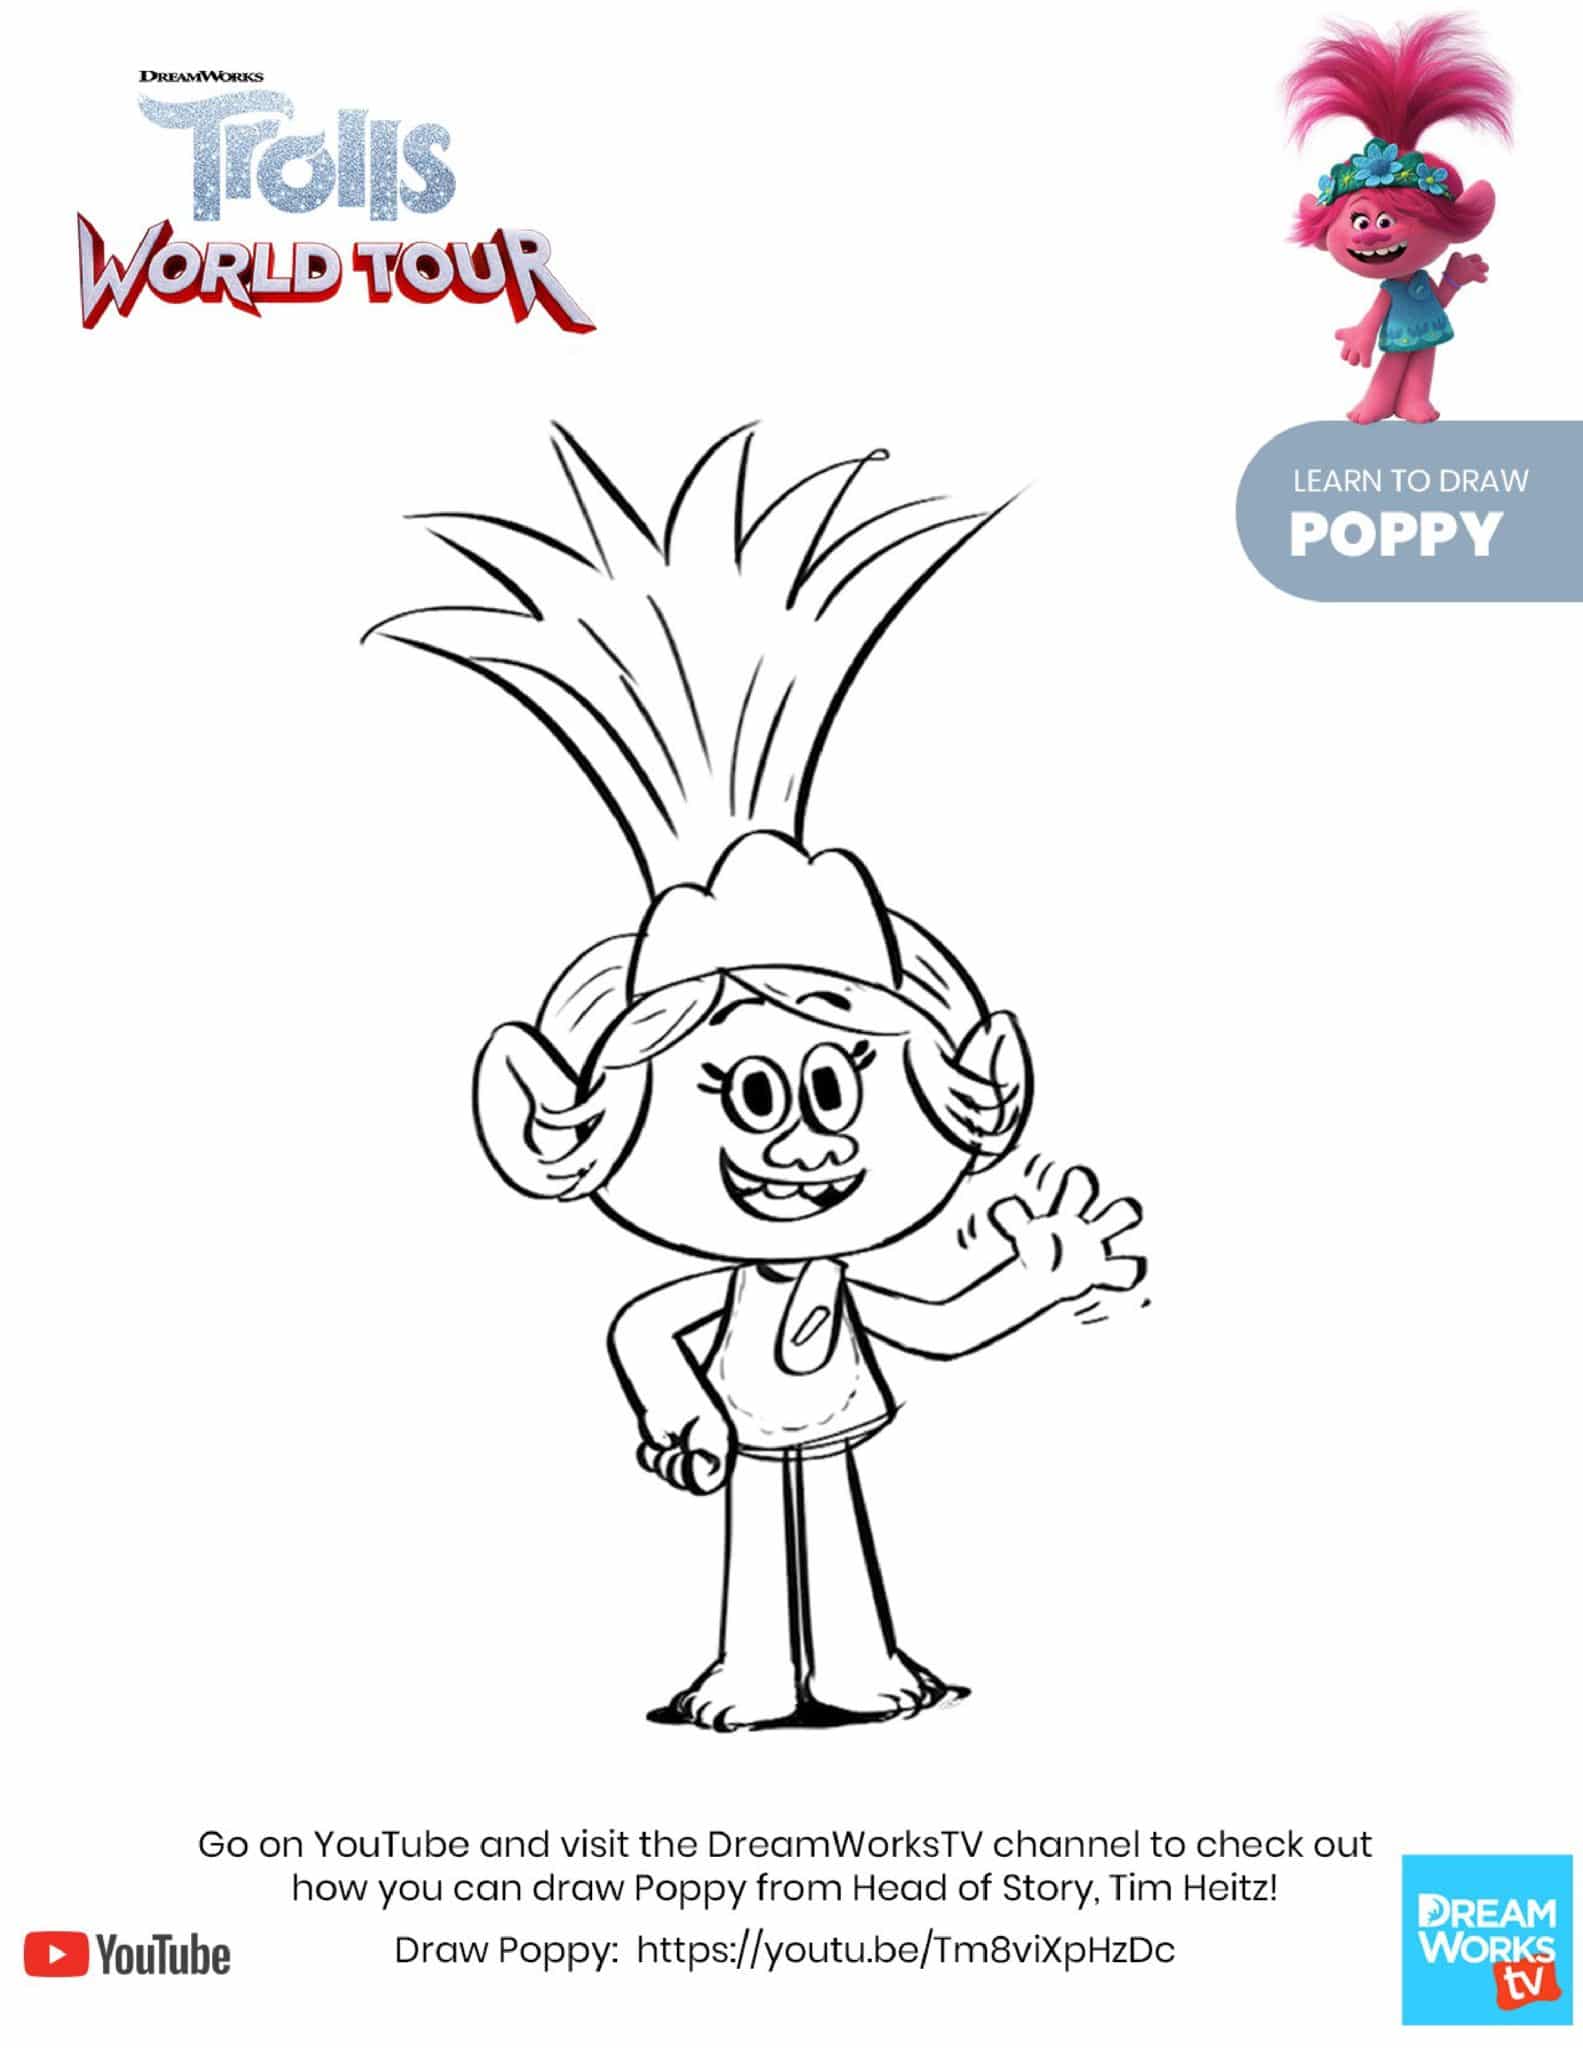 Learn to Draw Poppy - Trolls World Tour Coloring Pages